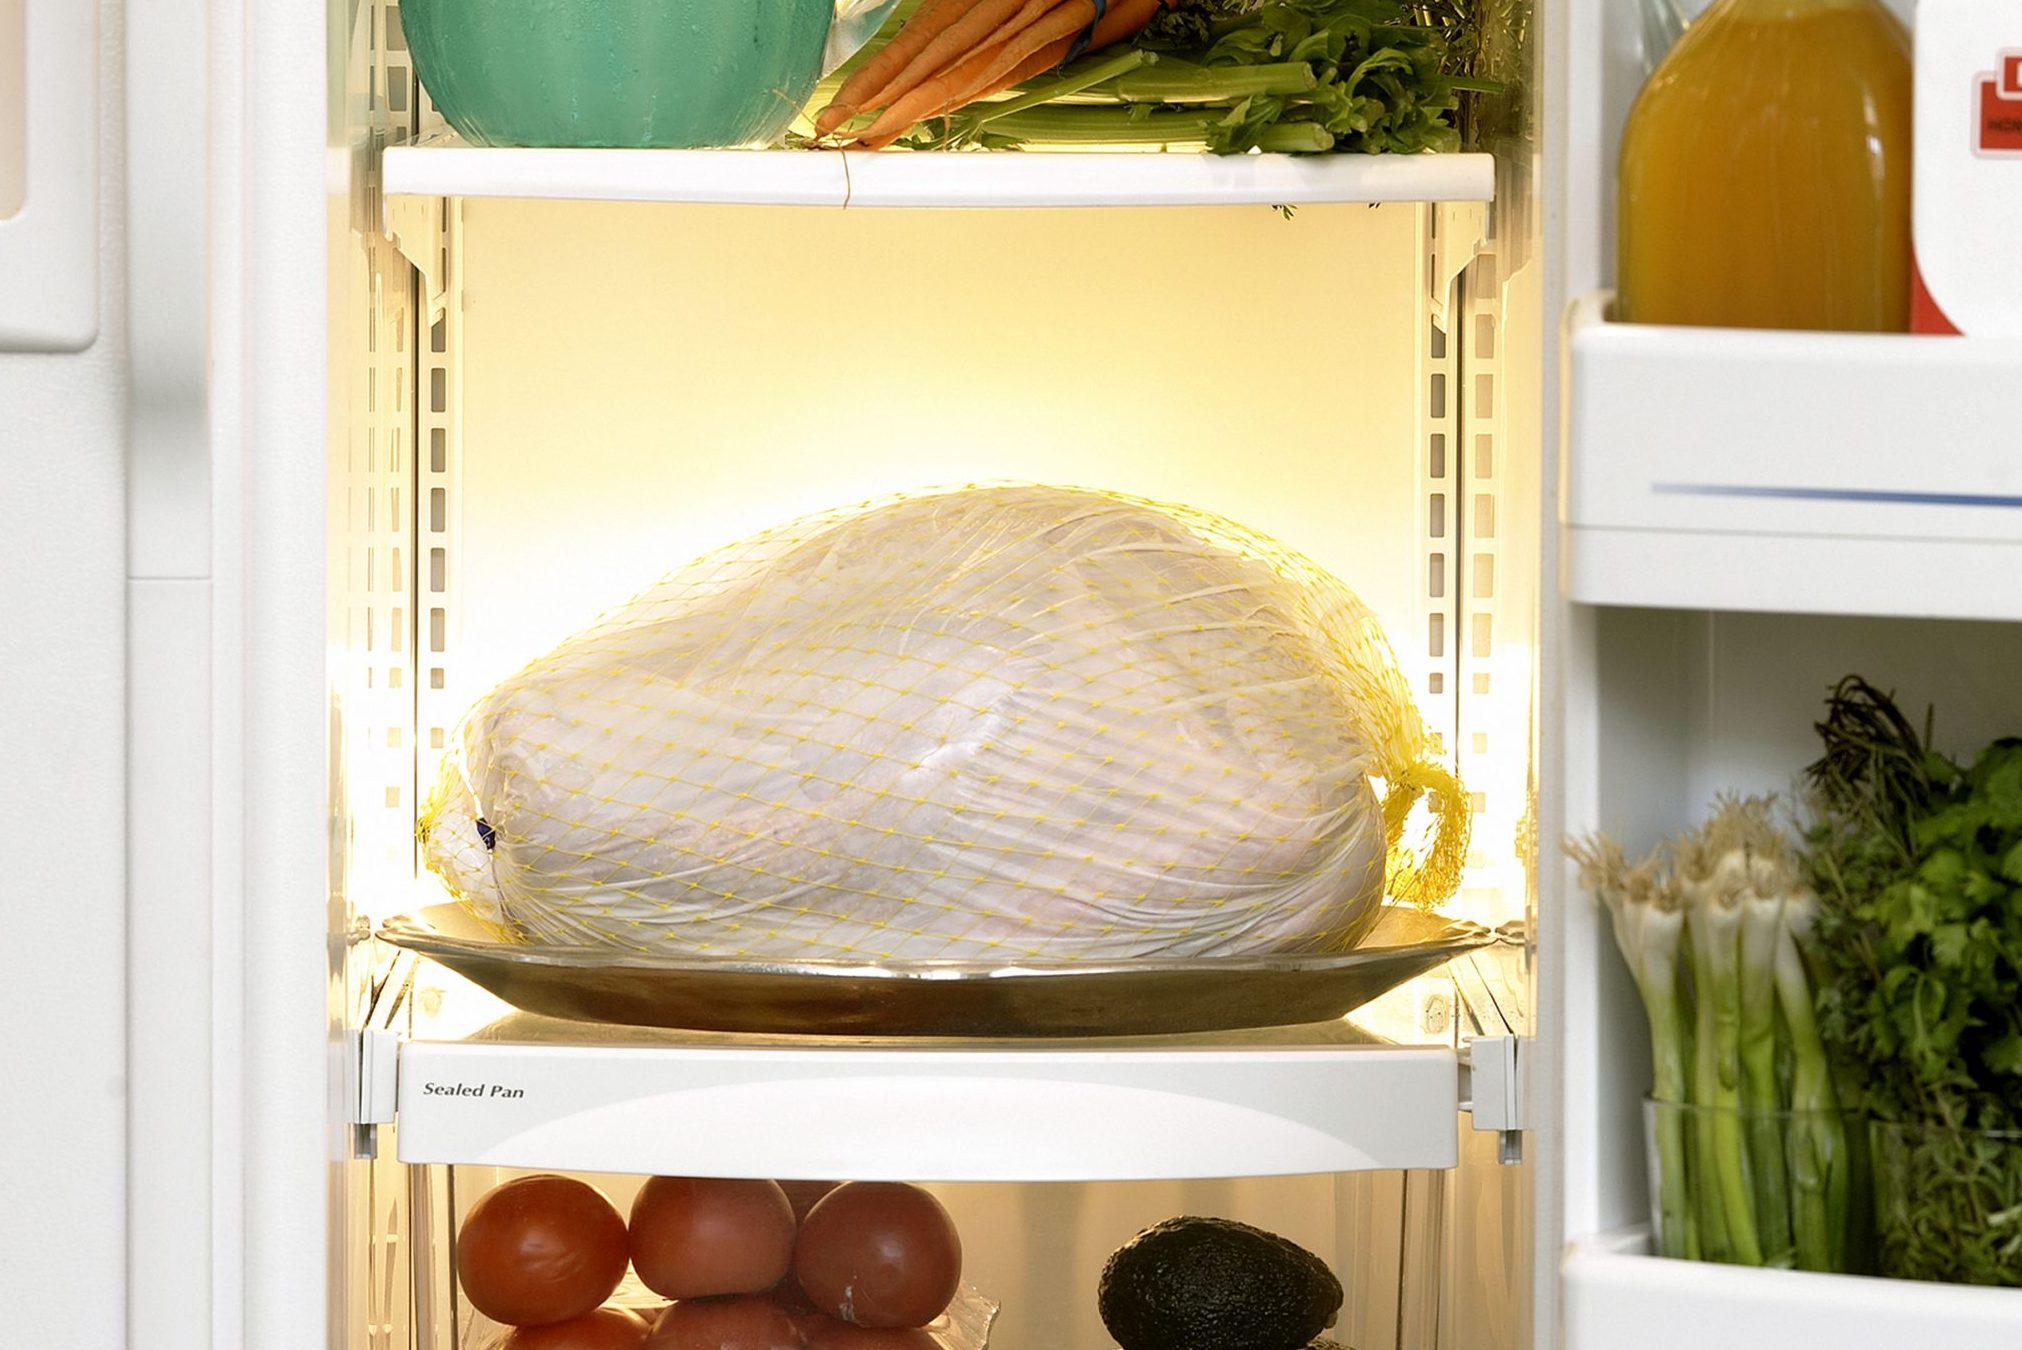  How Long to Thaw a Frozen Turkey